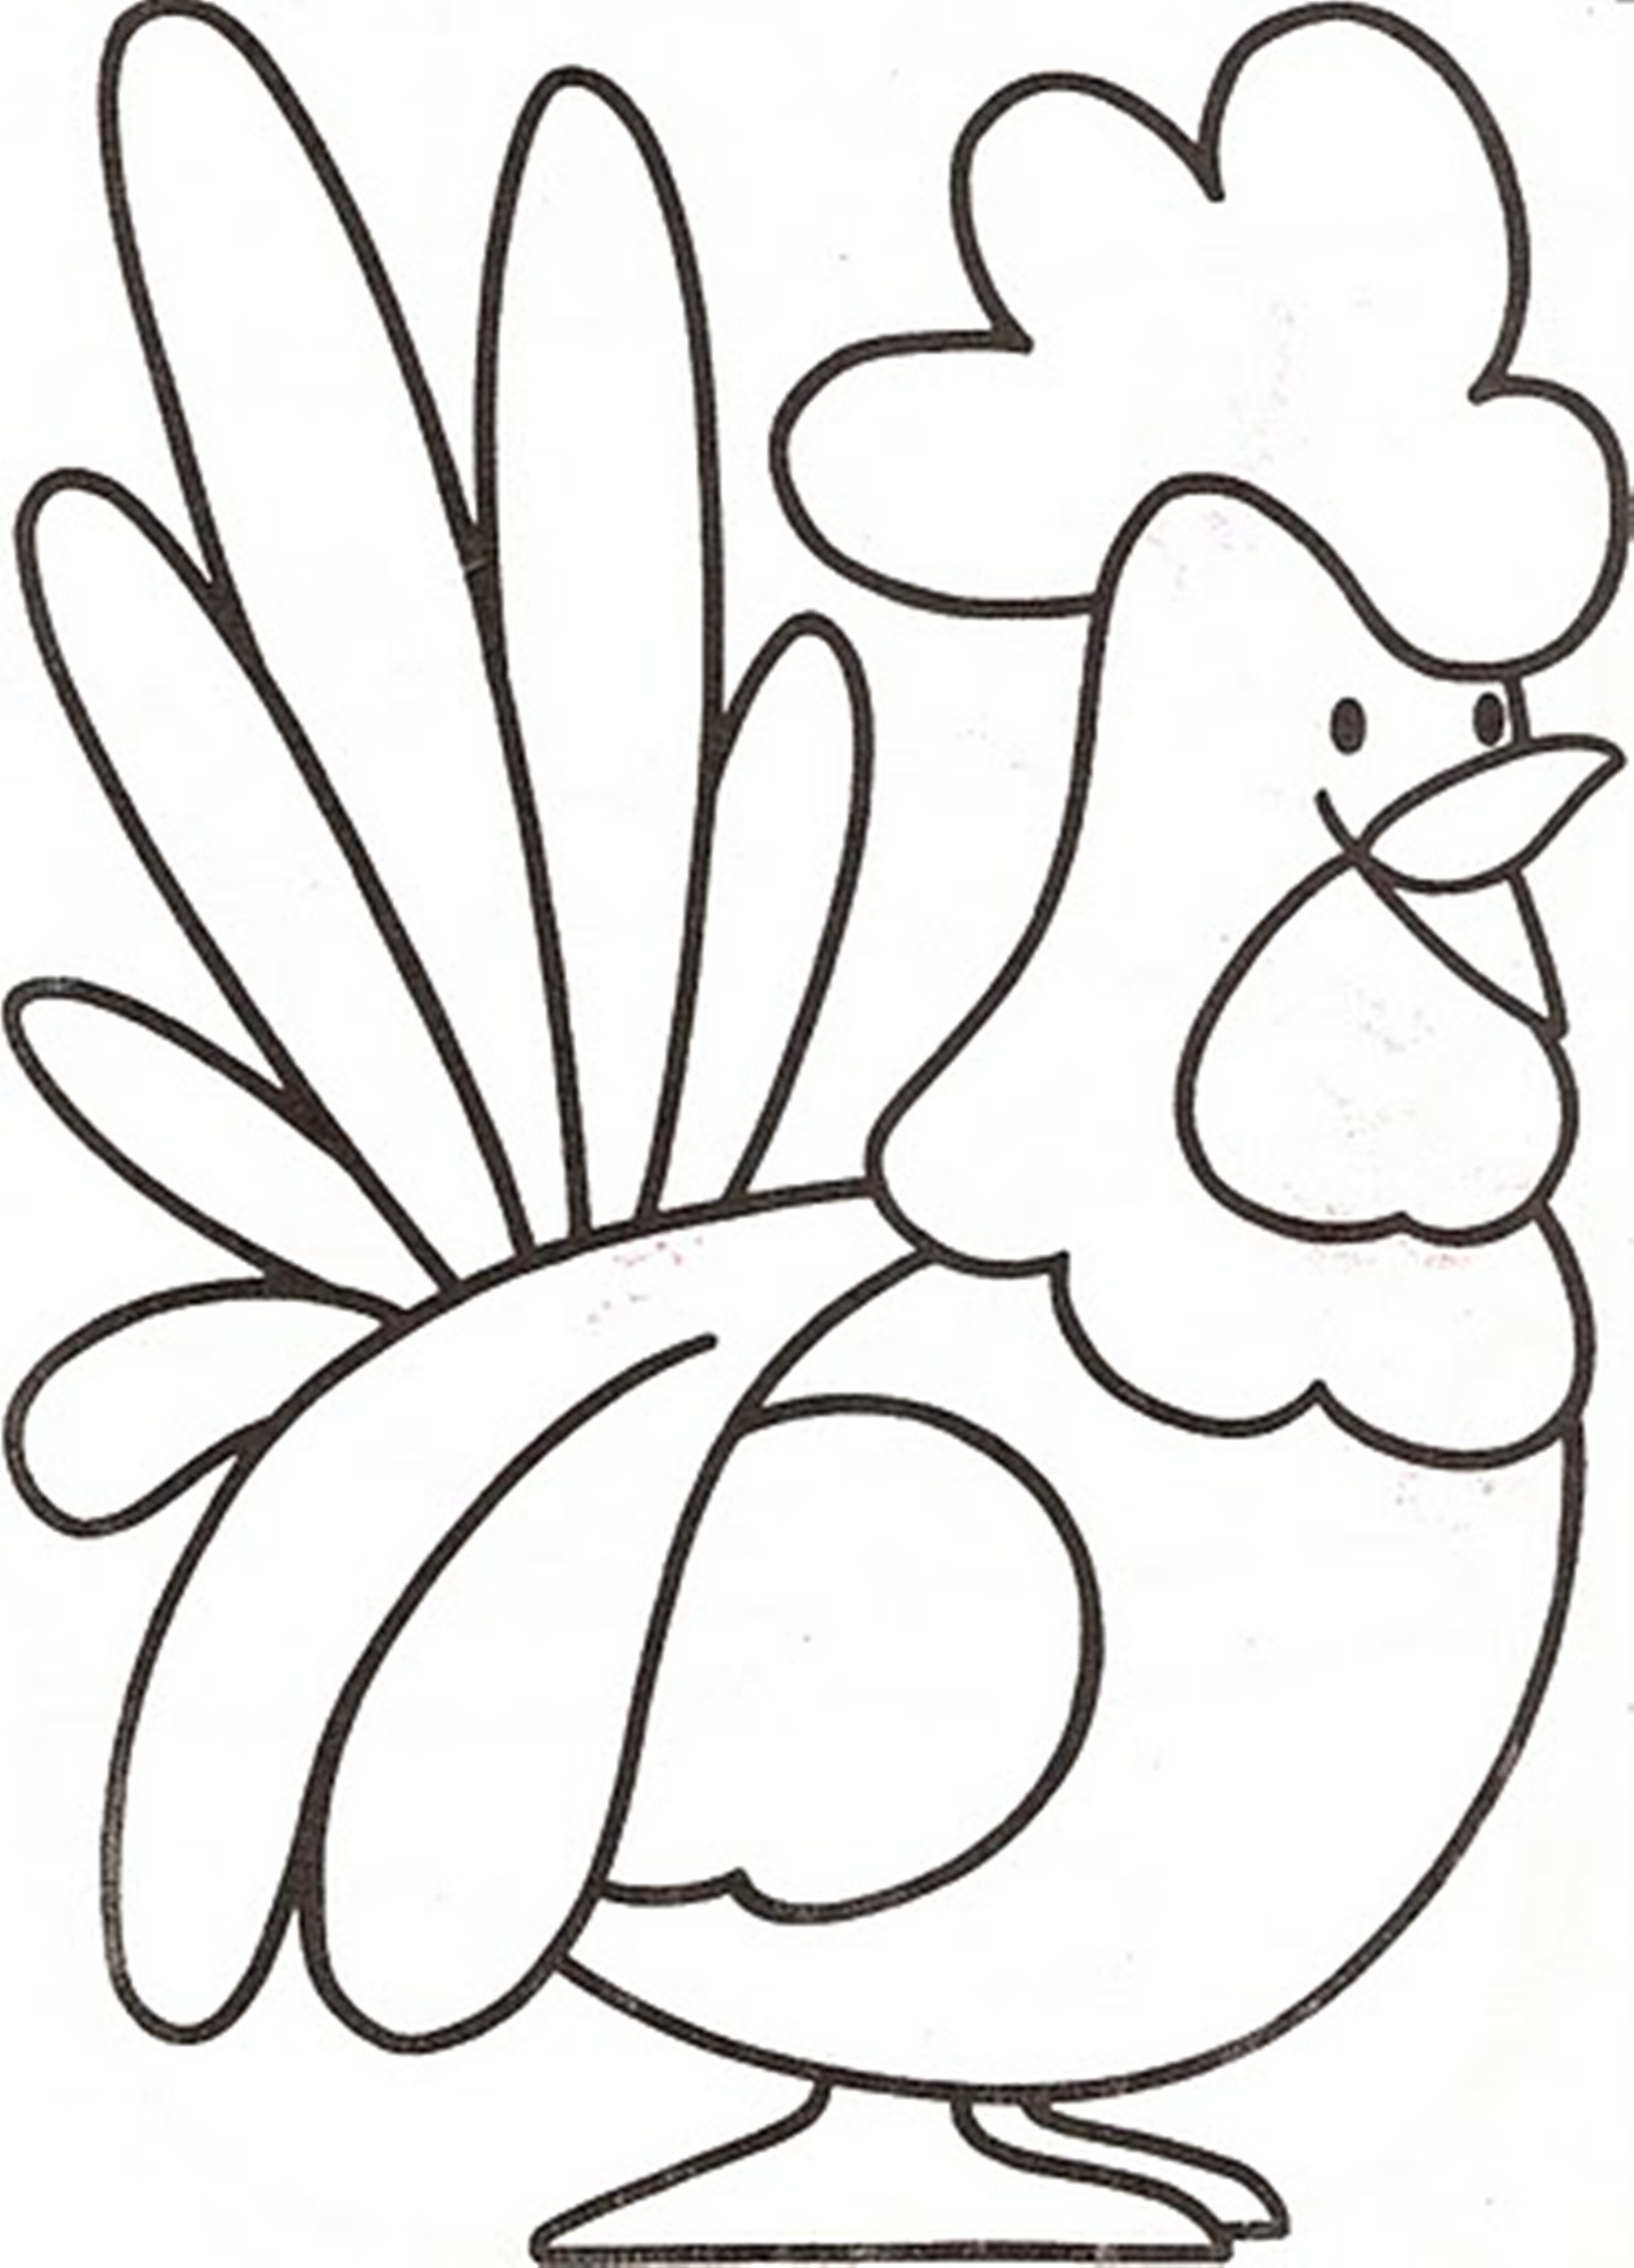 Preschool Coloring Sheets Of A Chicken Free Printable
 Coloring Pages for Kindergarten Bestofcoloring